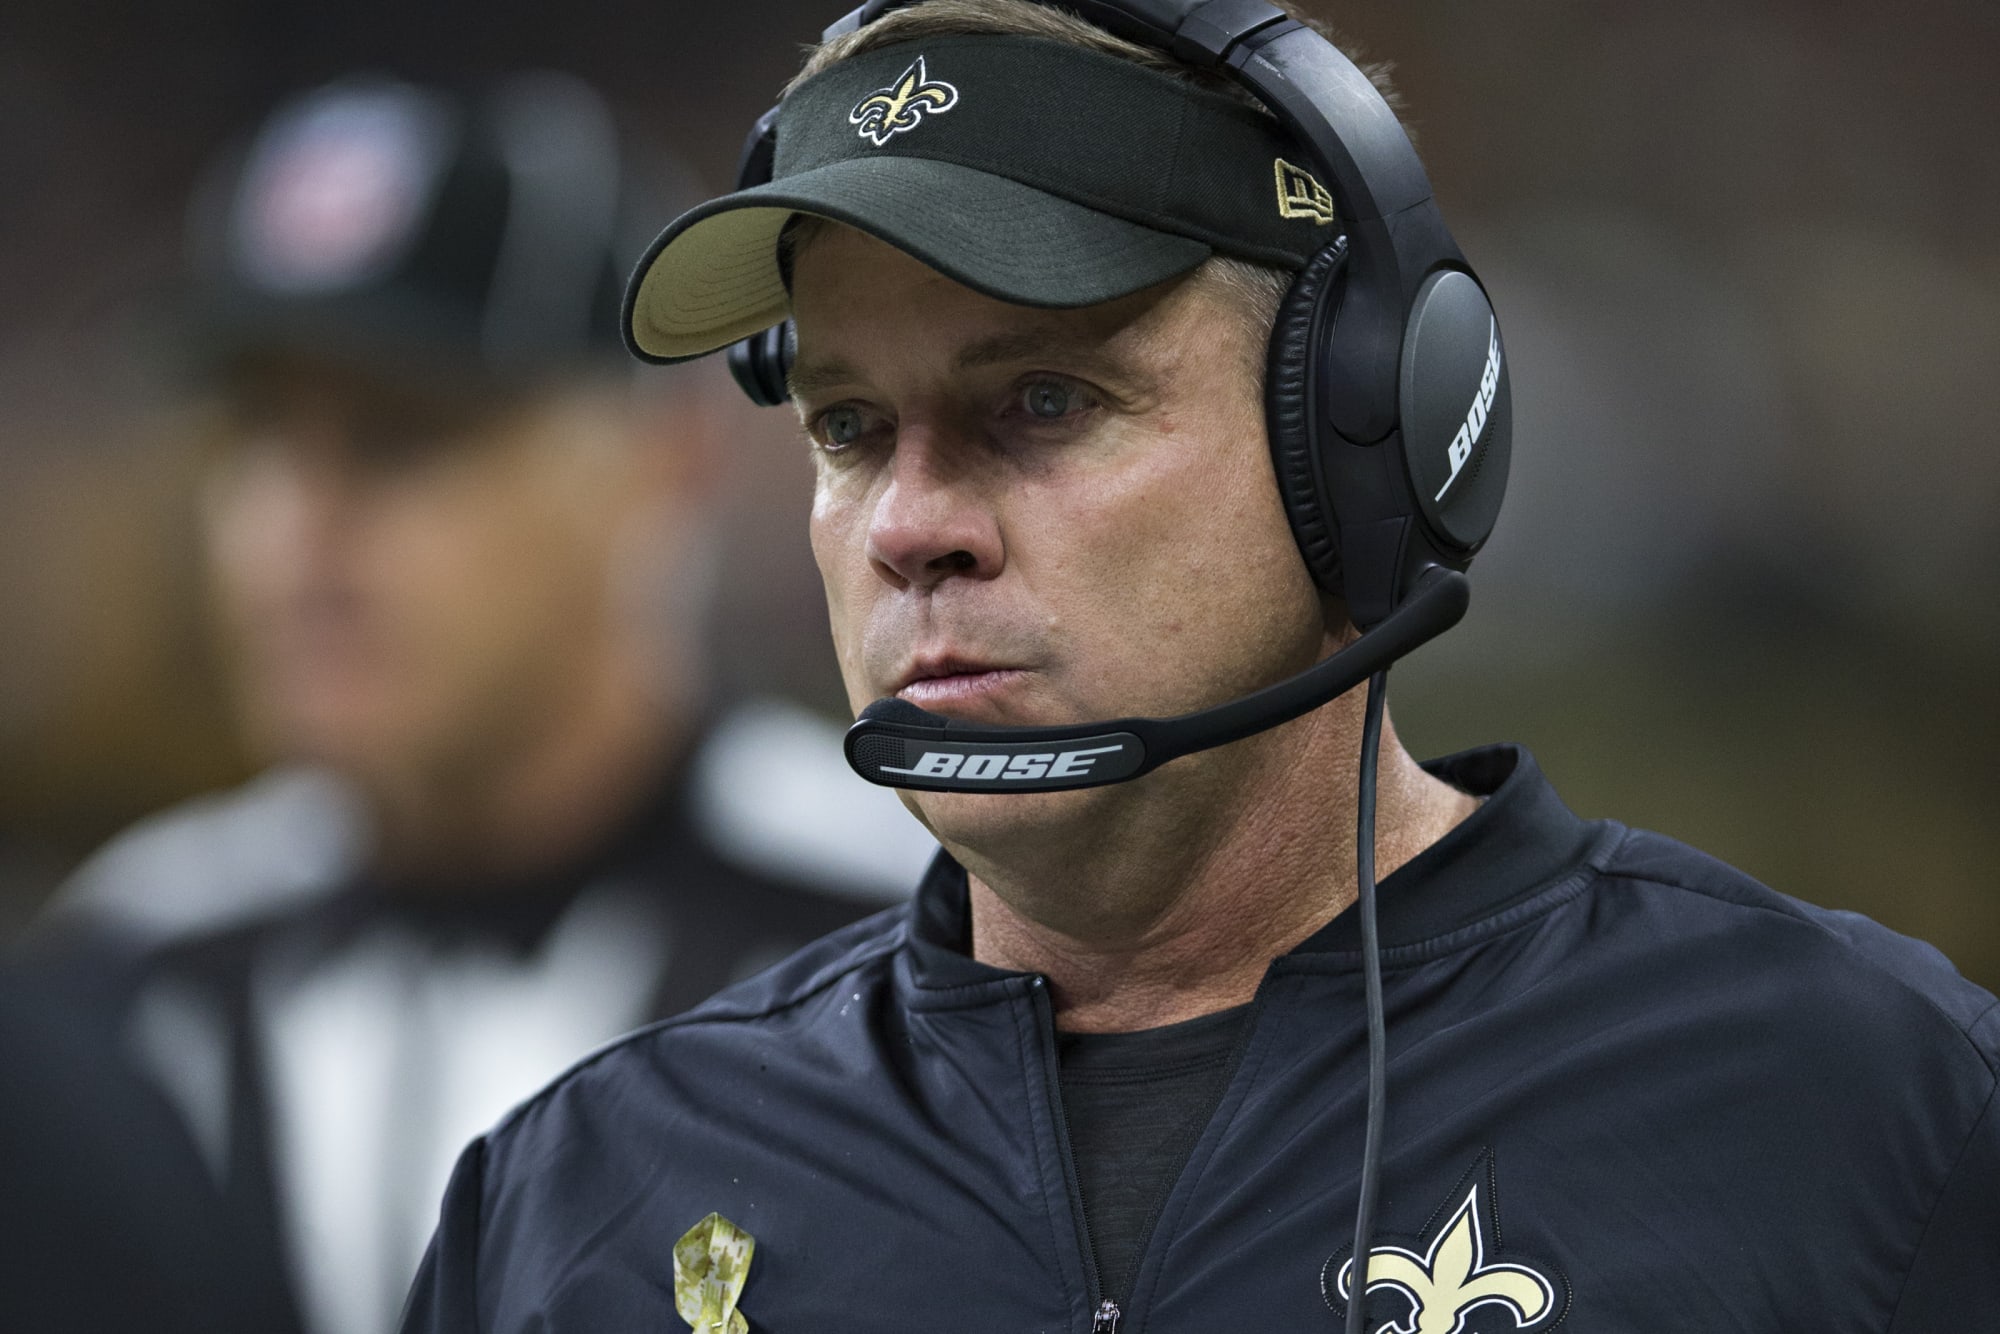 Saints reporter drops breadcrumps that could explain why Sean Payton didn’t get 2nd interview